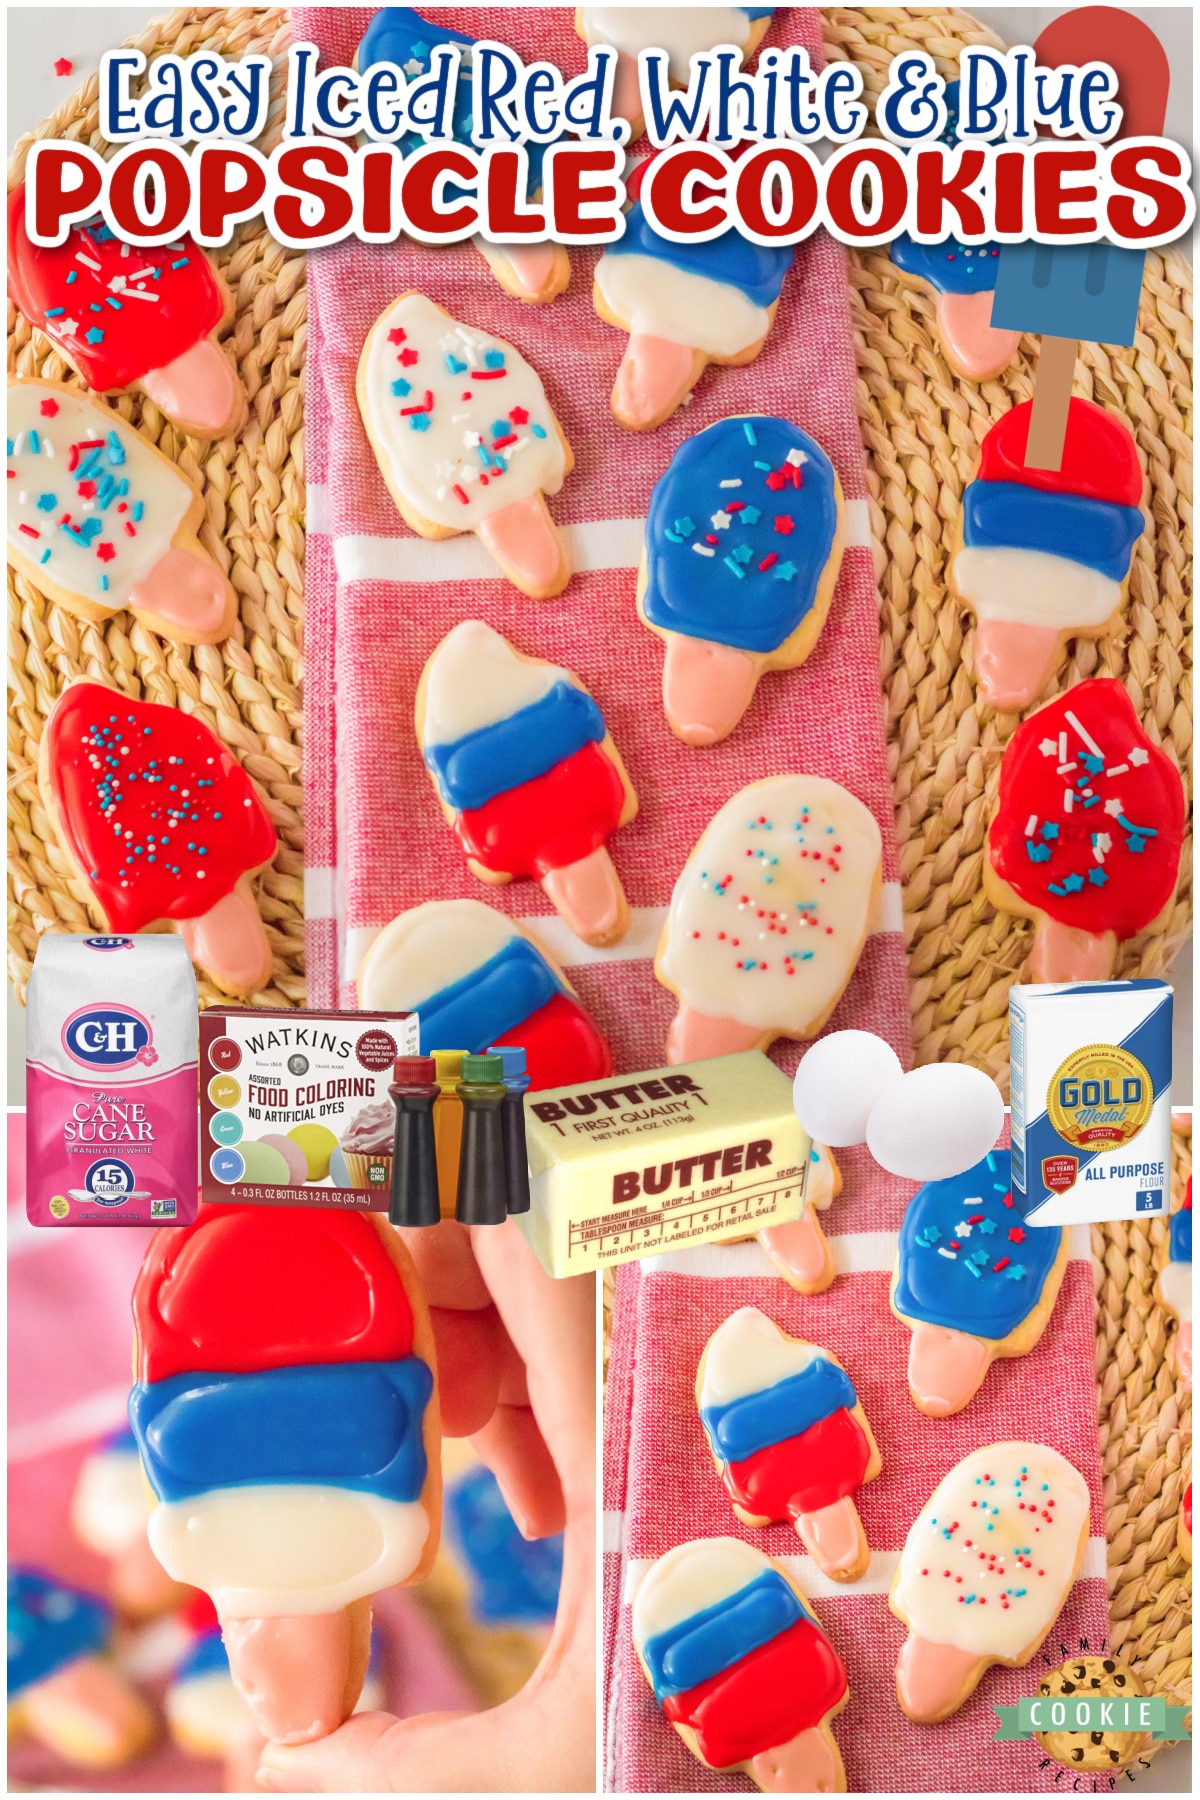 Popsicle Sugar Cookies are fun & tasty summer treat! Homemade sugar cookies cut into popsicle shapes & topped with royal icing everyone loves!